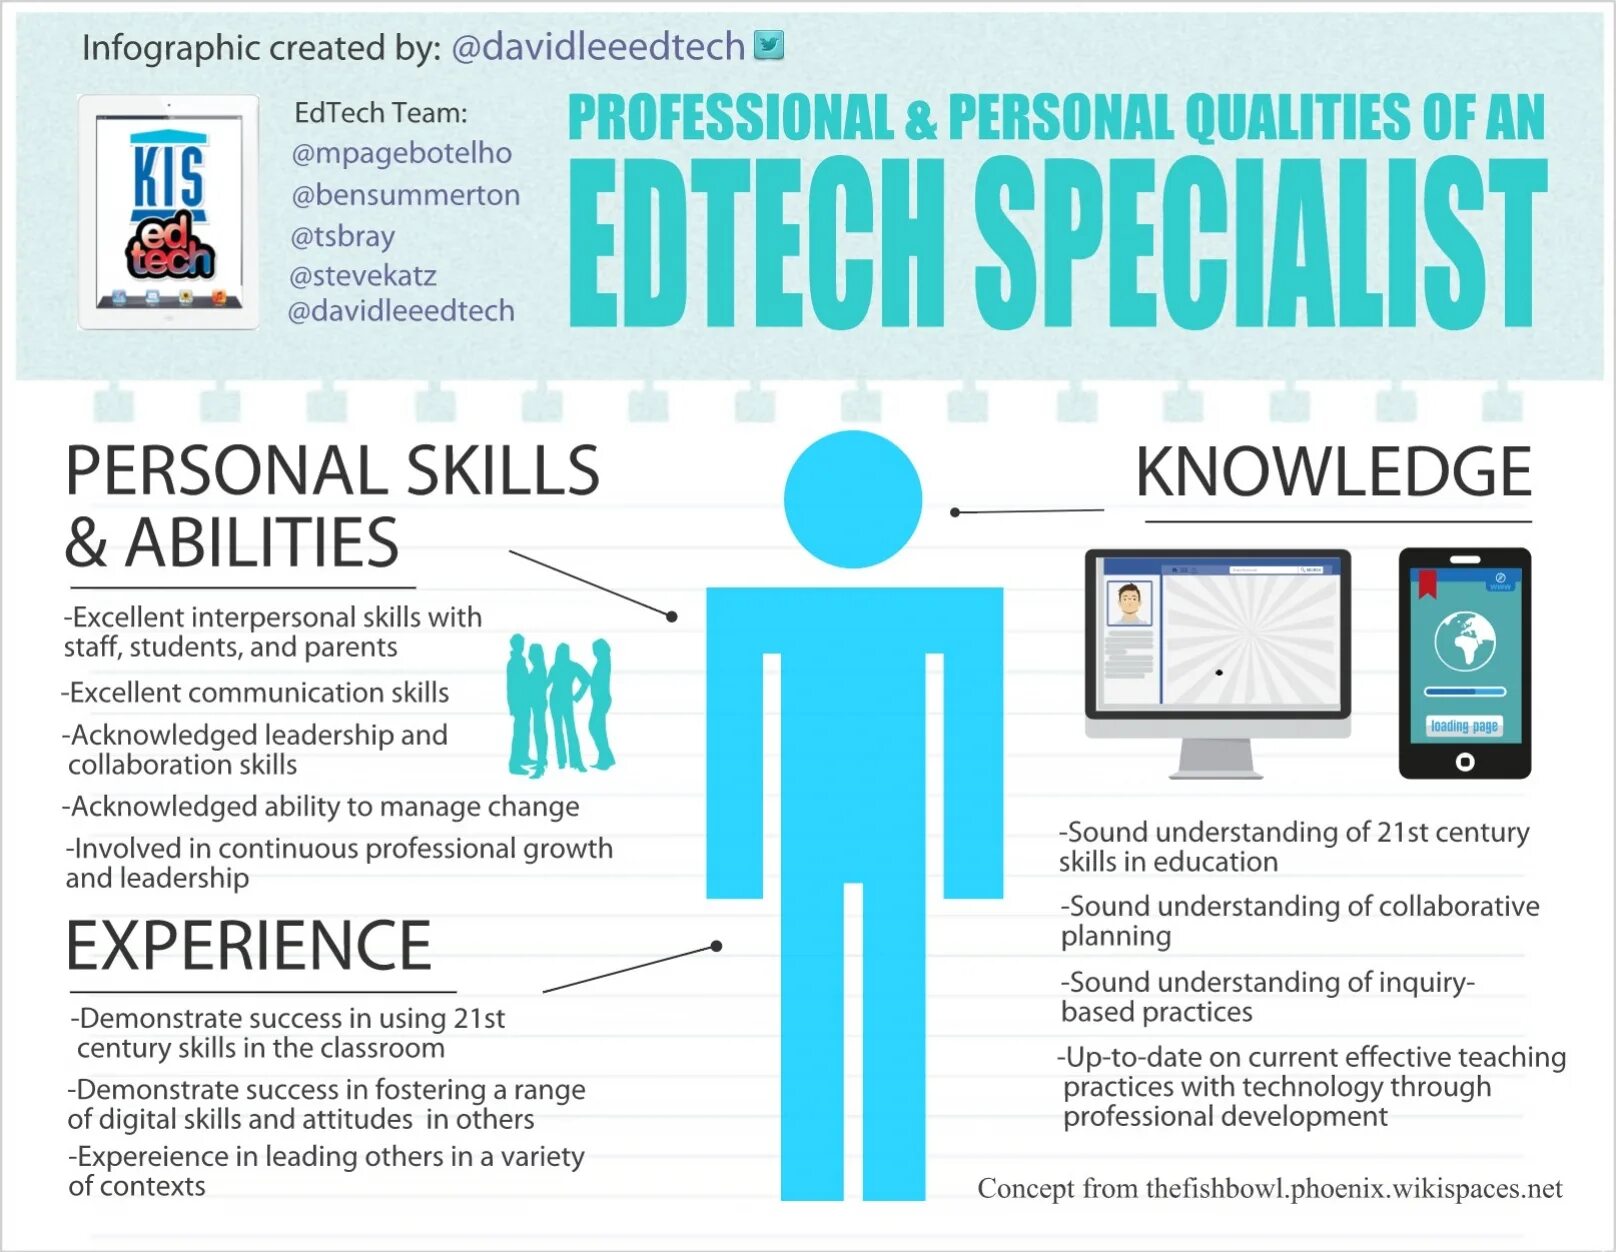 Personal qualities and personal skills. Personal and professional skills. Professional qualities. Personal qualities картинка.